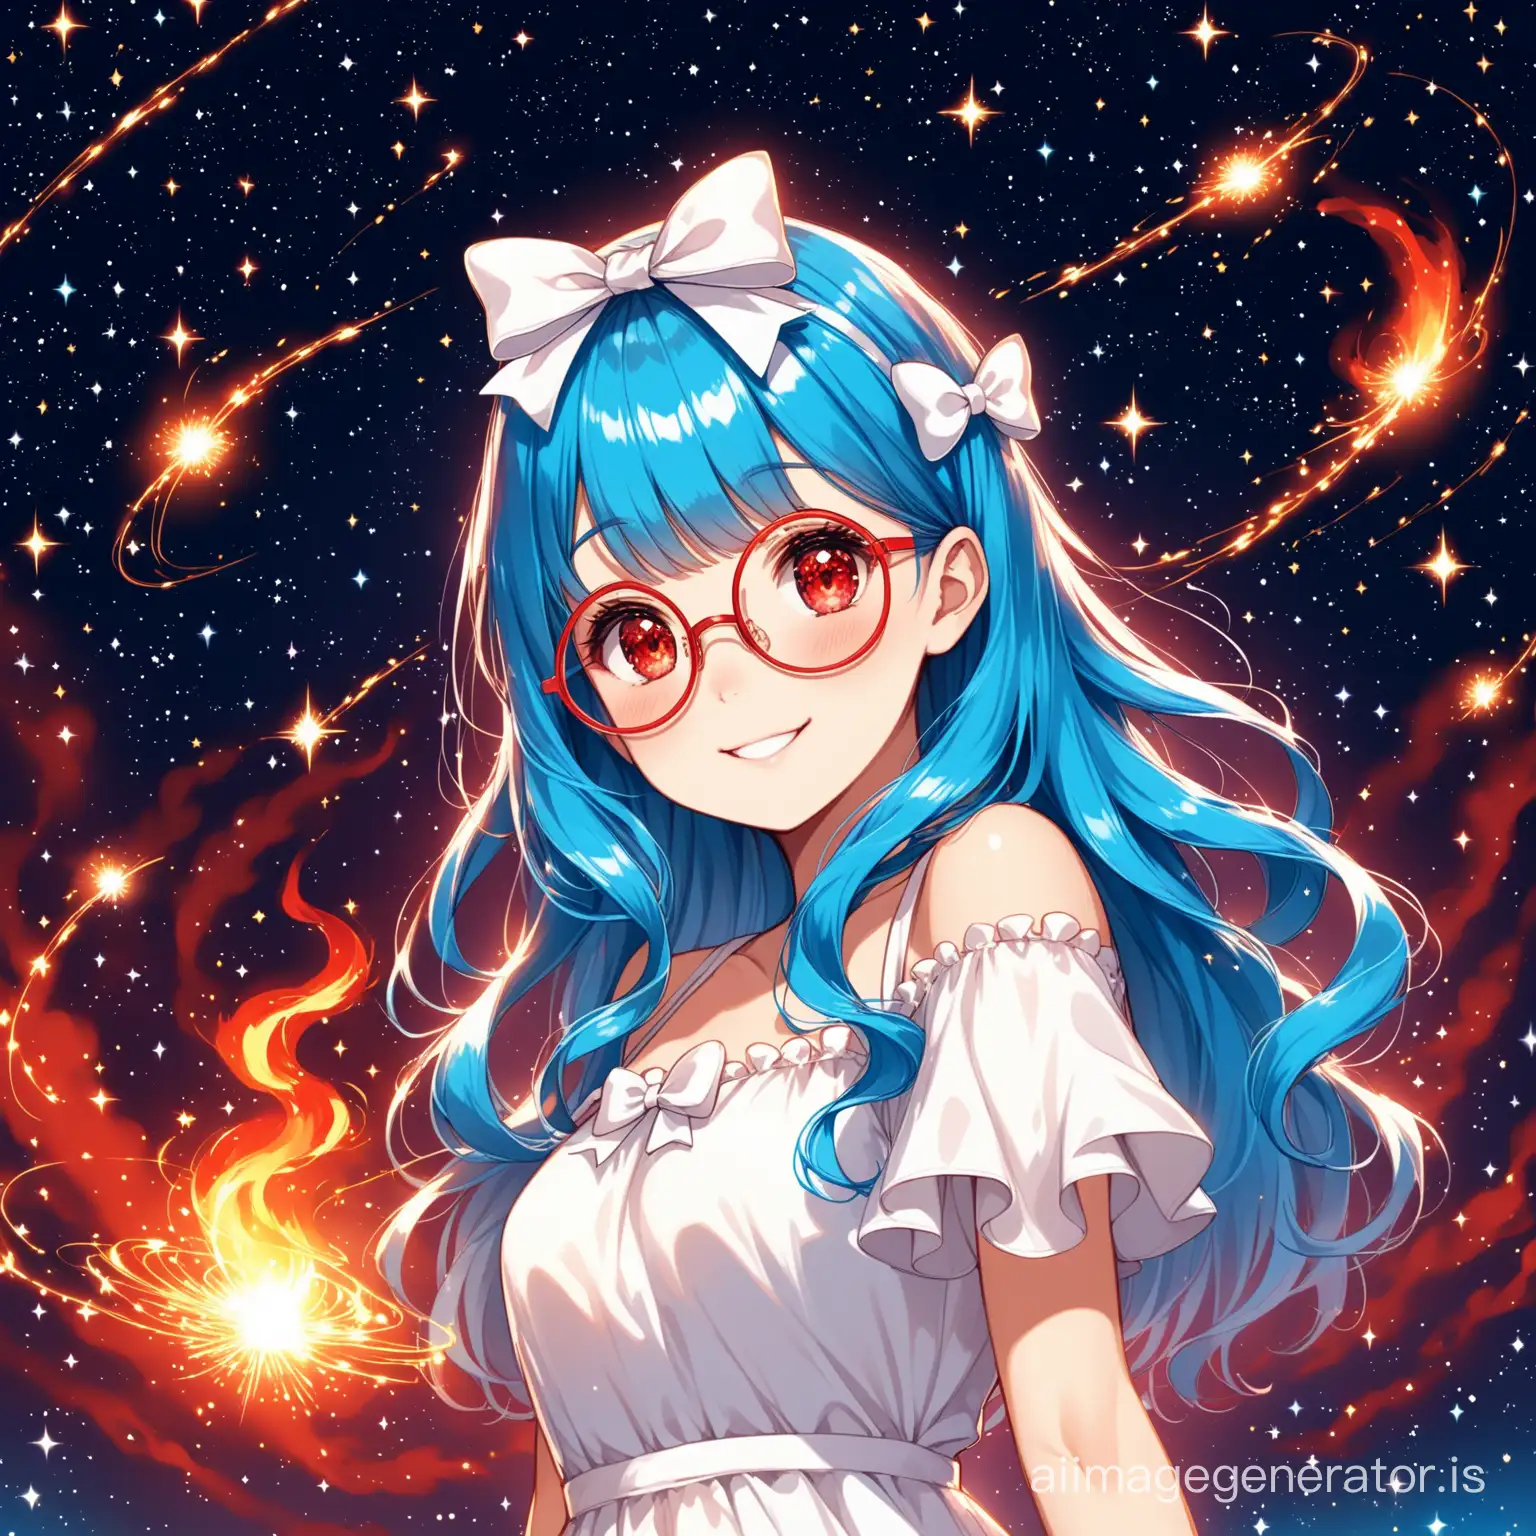 The girl with blue hair, her hair shimmers red, she has red eyes, in big round glasses, in a beautiful black and white dress, her hair is slightly curly, on her head are 2 cute white bows, she is smiling, in the background there are a few sparks resembling fire, in the background there is a starry sky and the outline of another galaxy of red color.